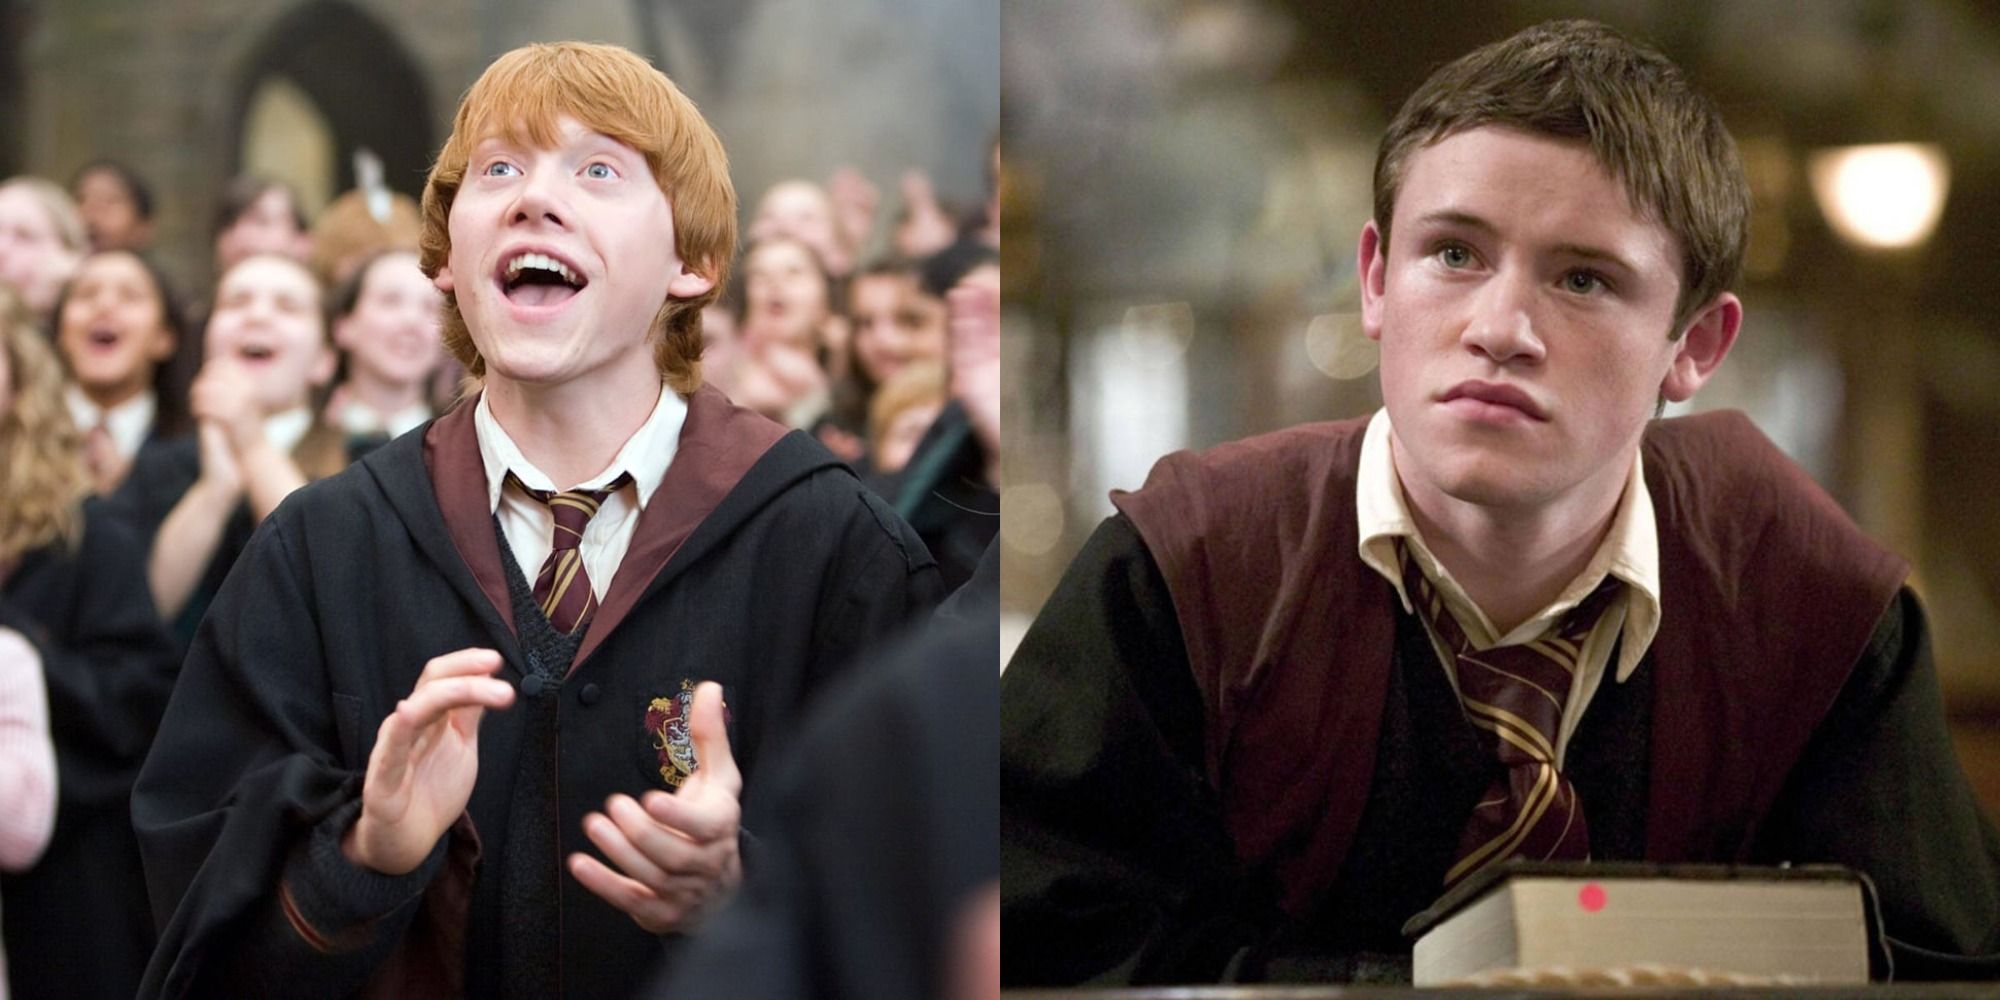 A split image showing Ron one the left and Seamus on the right from Harry Potter